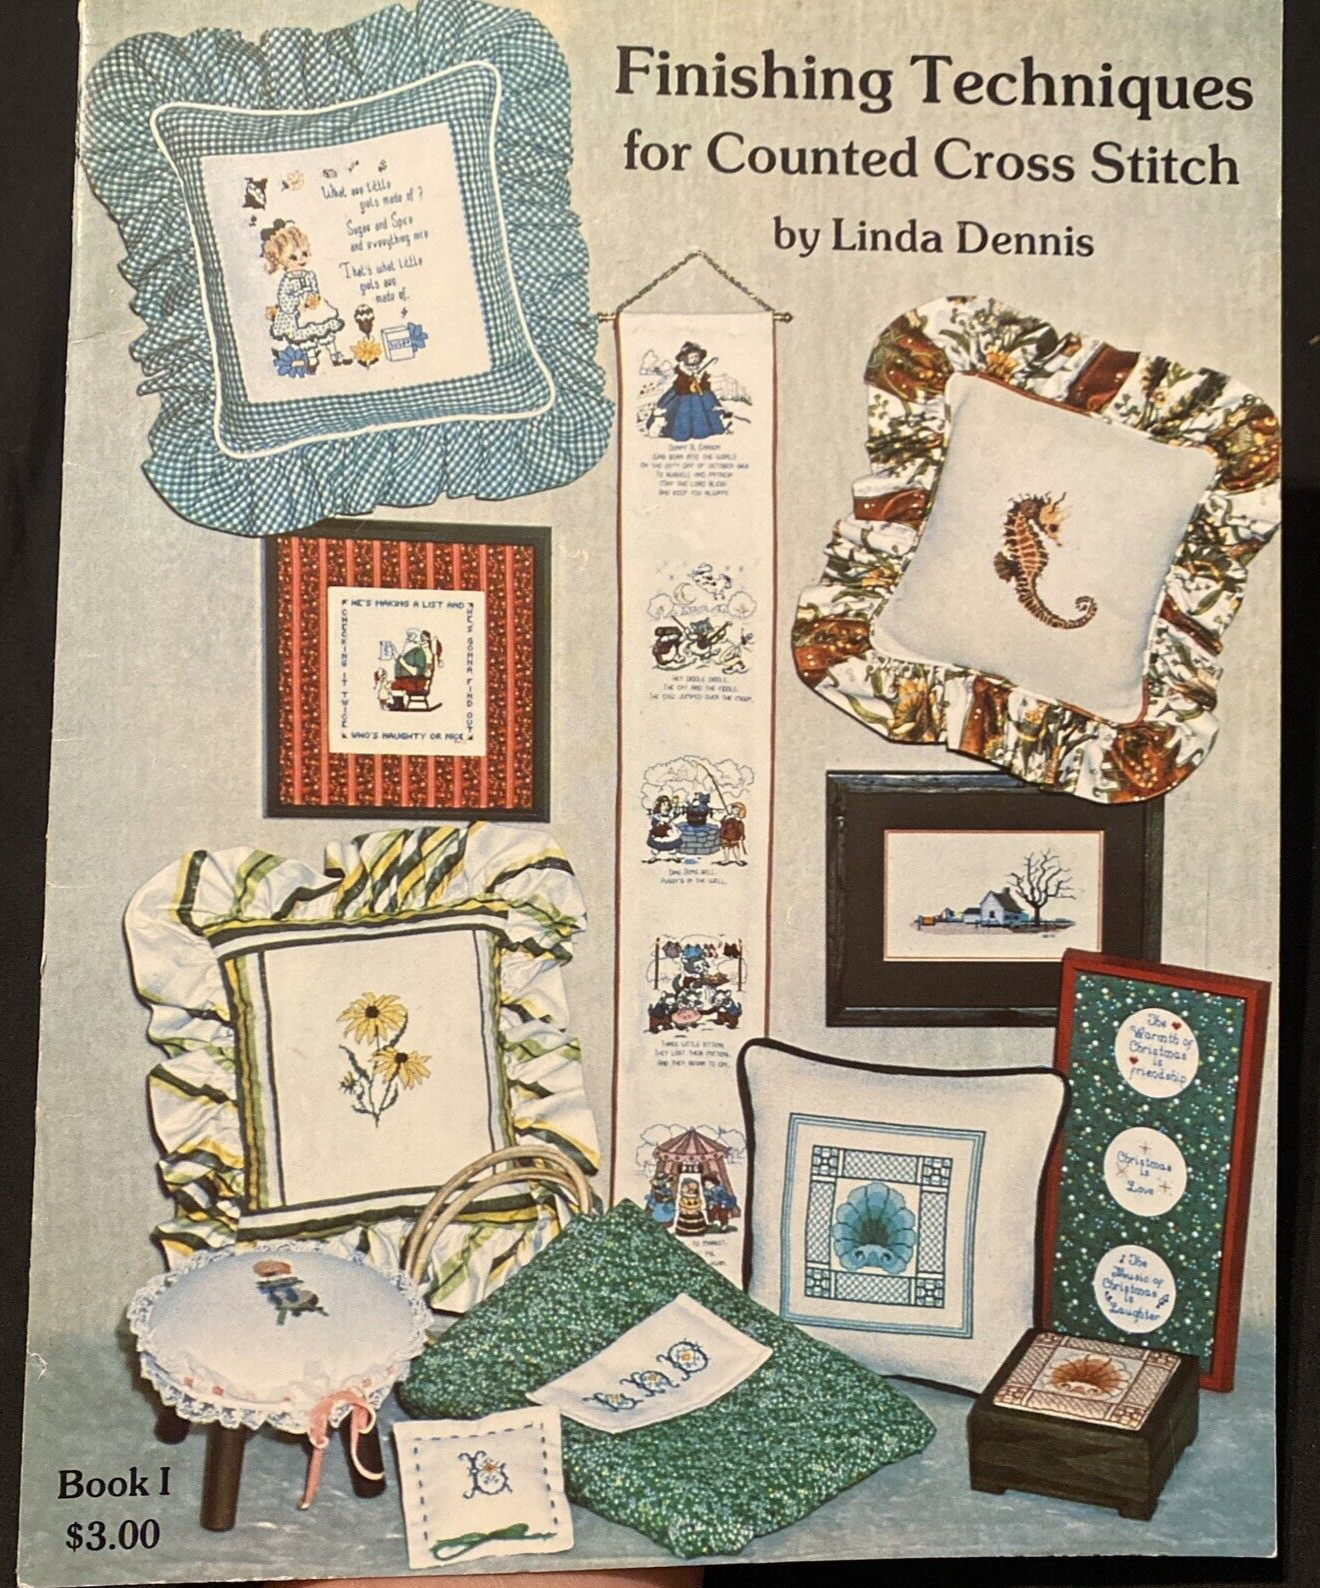 Finishing Techniques for Counted Cross Stitch 16 pages Book I 1977 - $4.80